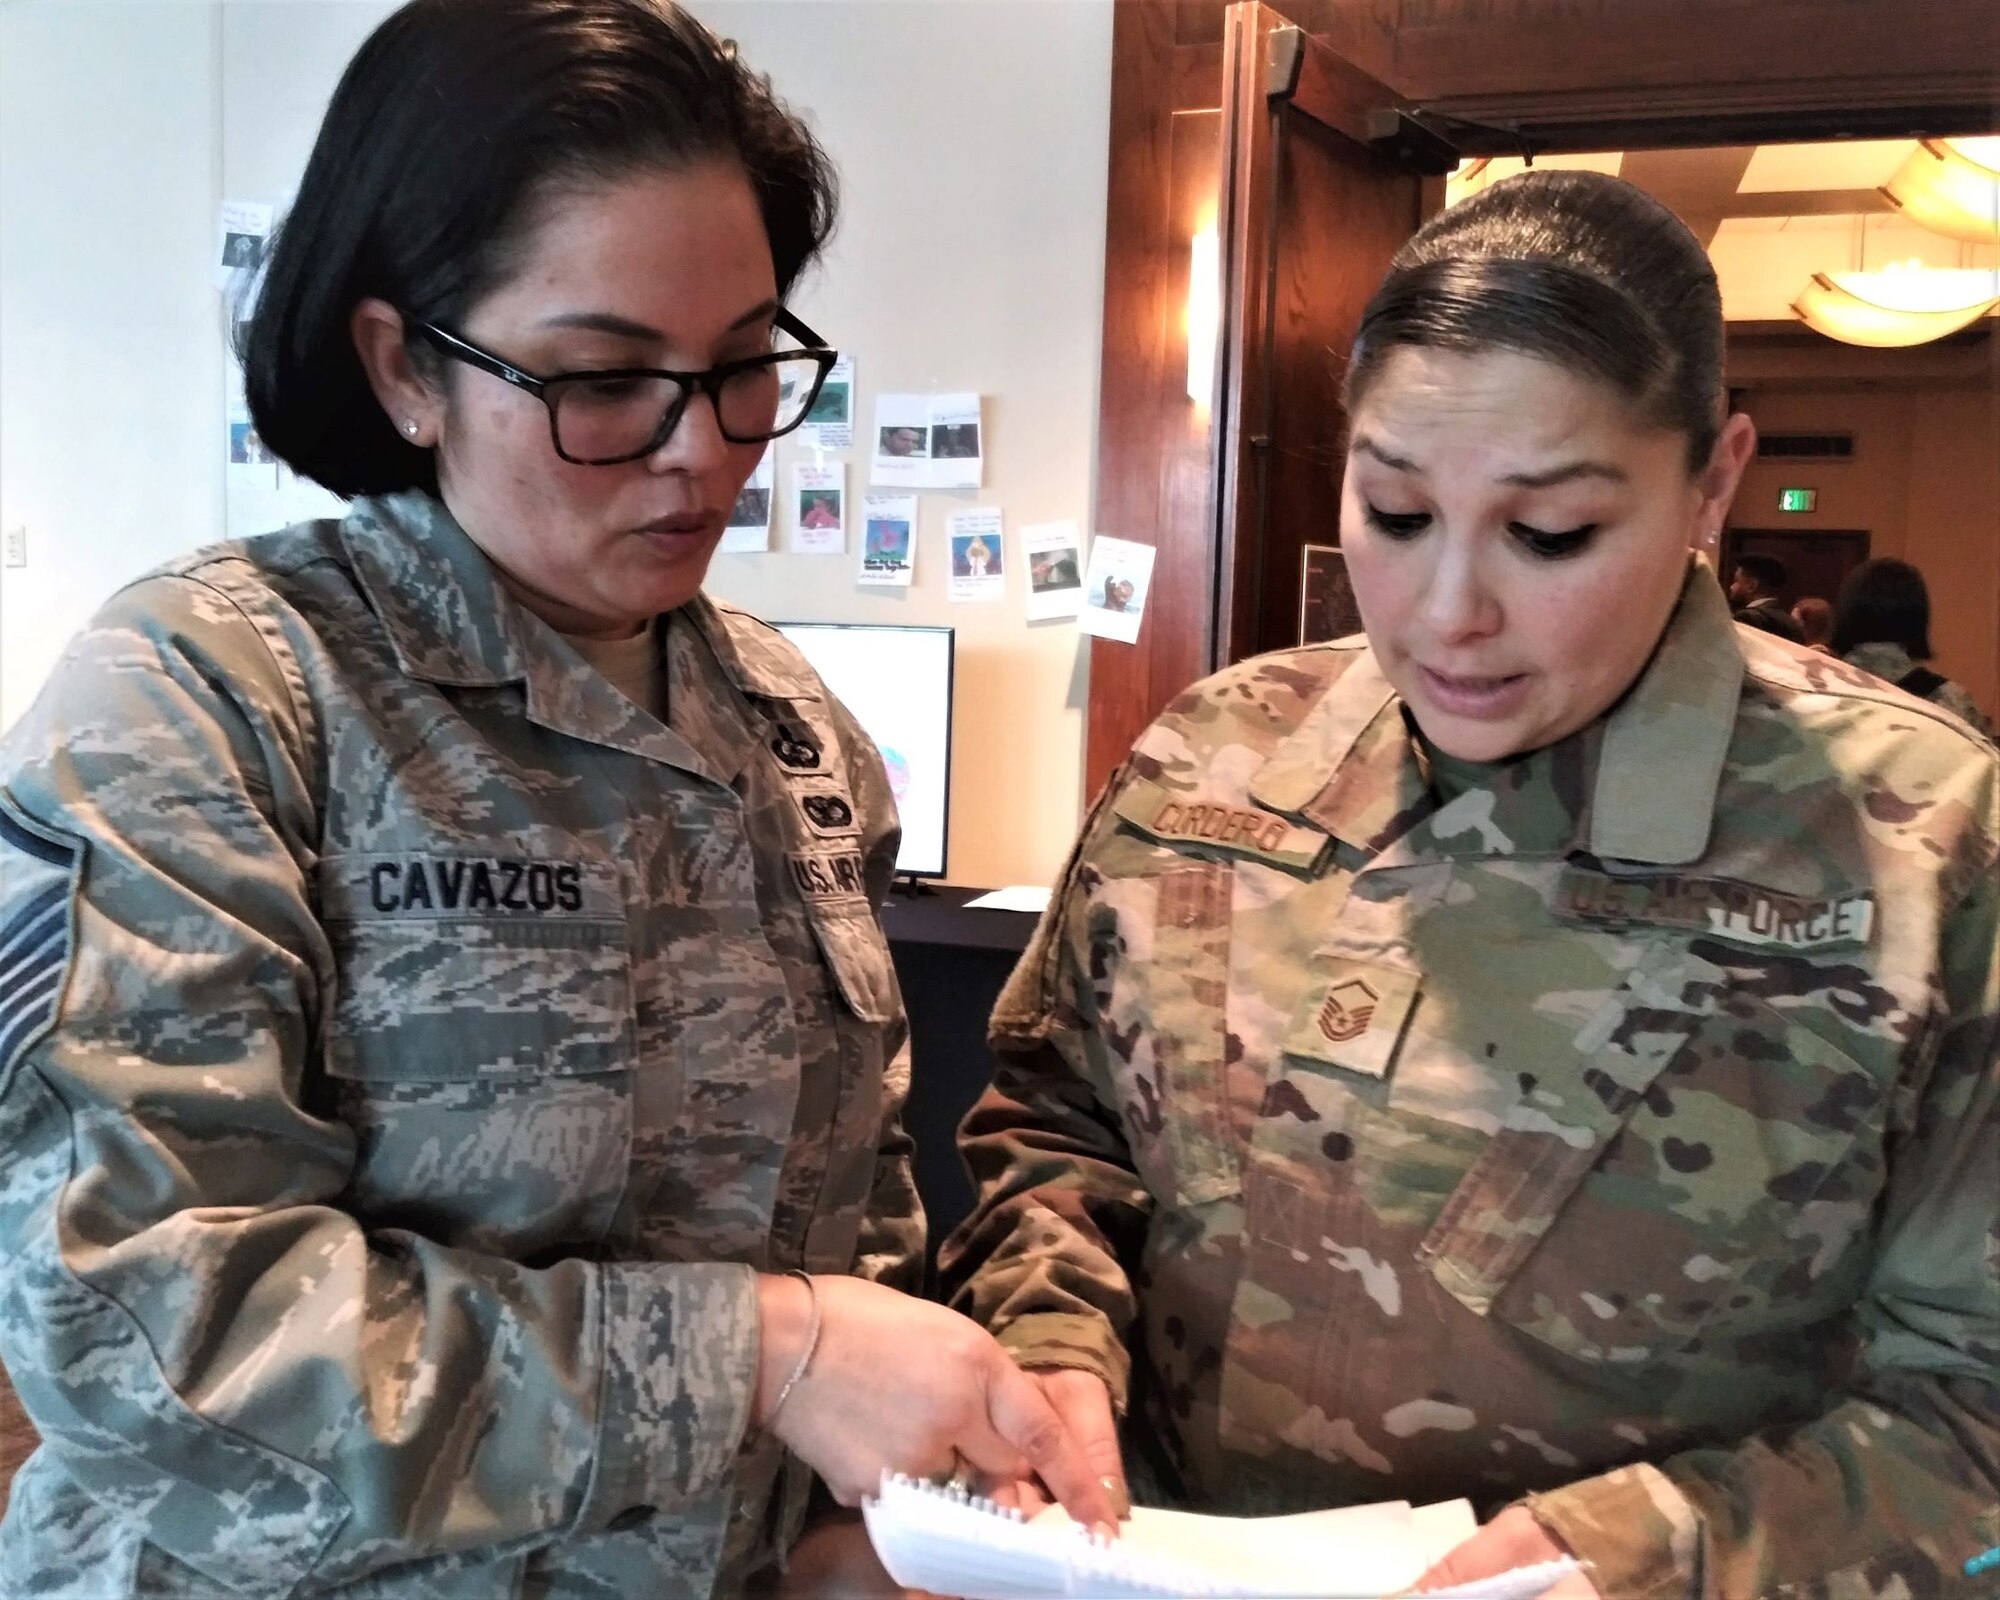 Master Sgt. Mariya Cavazos, Financial Services office flight chief at Ellsworth Air Force Base, South Dakota, shares information about a travel pay process with Master Sgt. Sedelia Cordero, financial operations flight chief at Dover Air Force Base, Delaware, during the 2020 Air Force Financial Operations Conference in San Antonio. (Air Force photo by Ed Shannon)